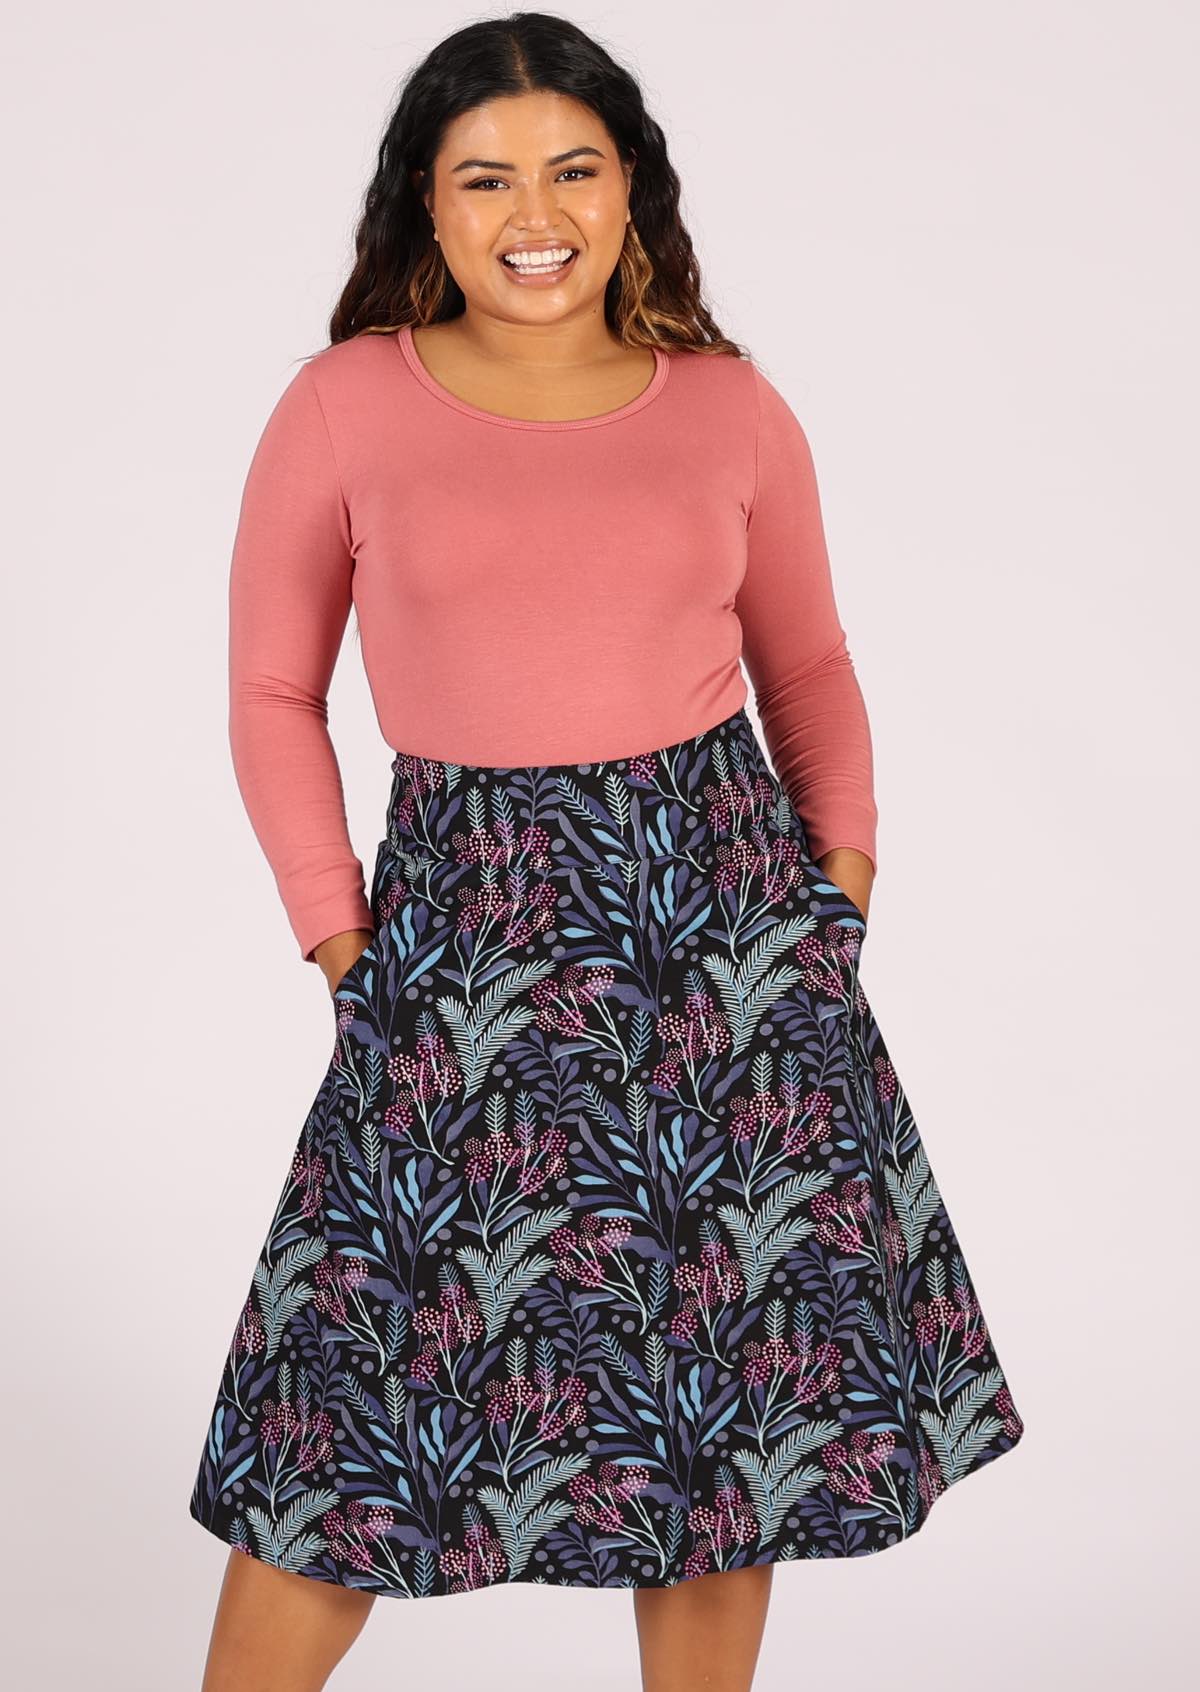 100% cotton generous A-line skirt with pockets